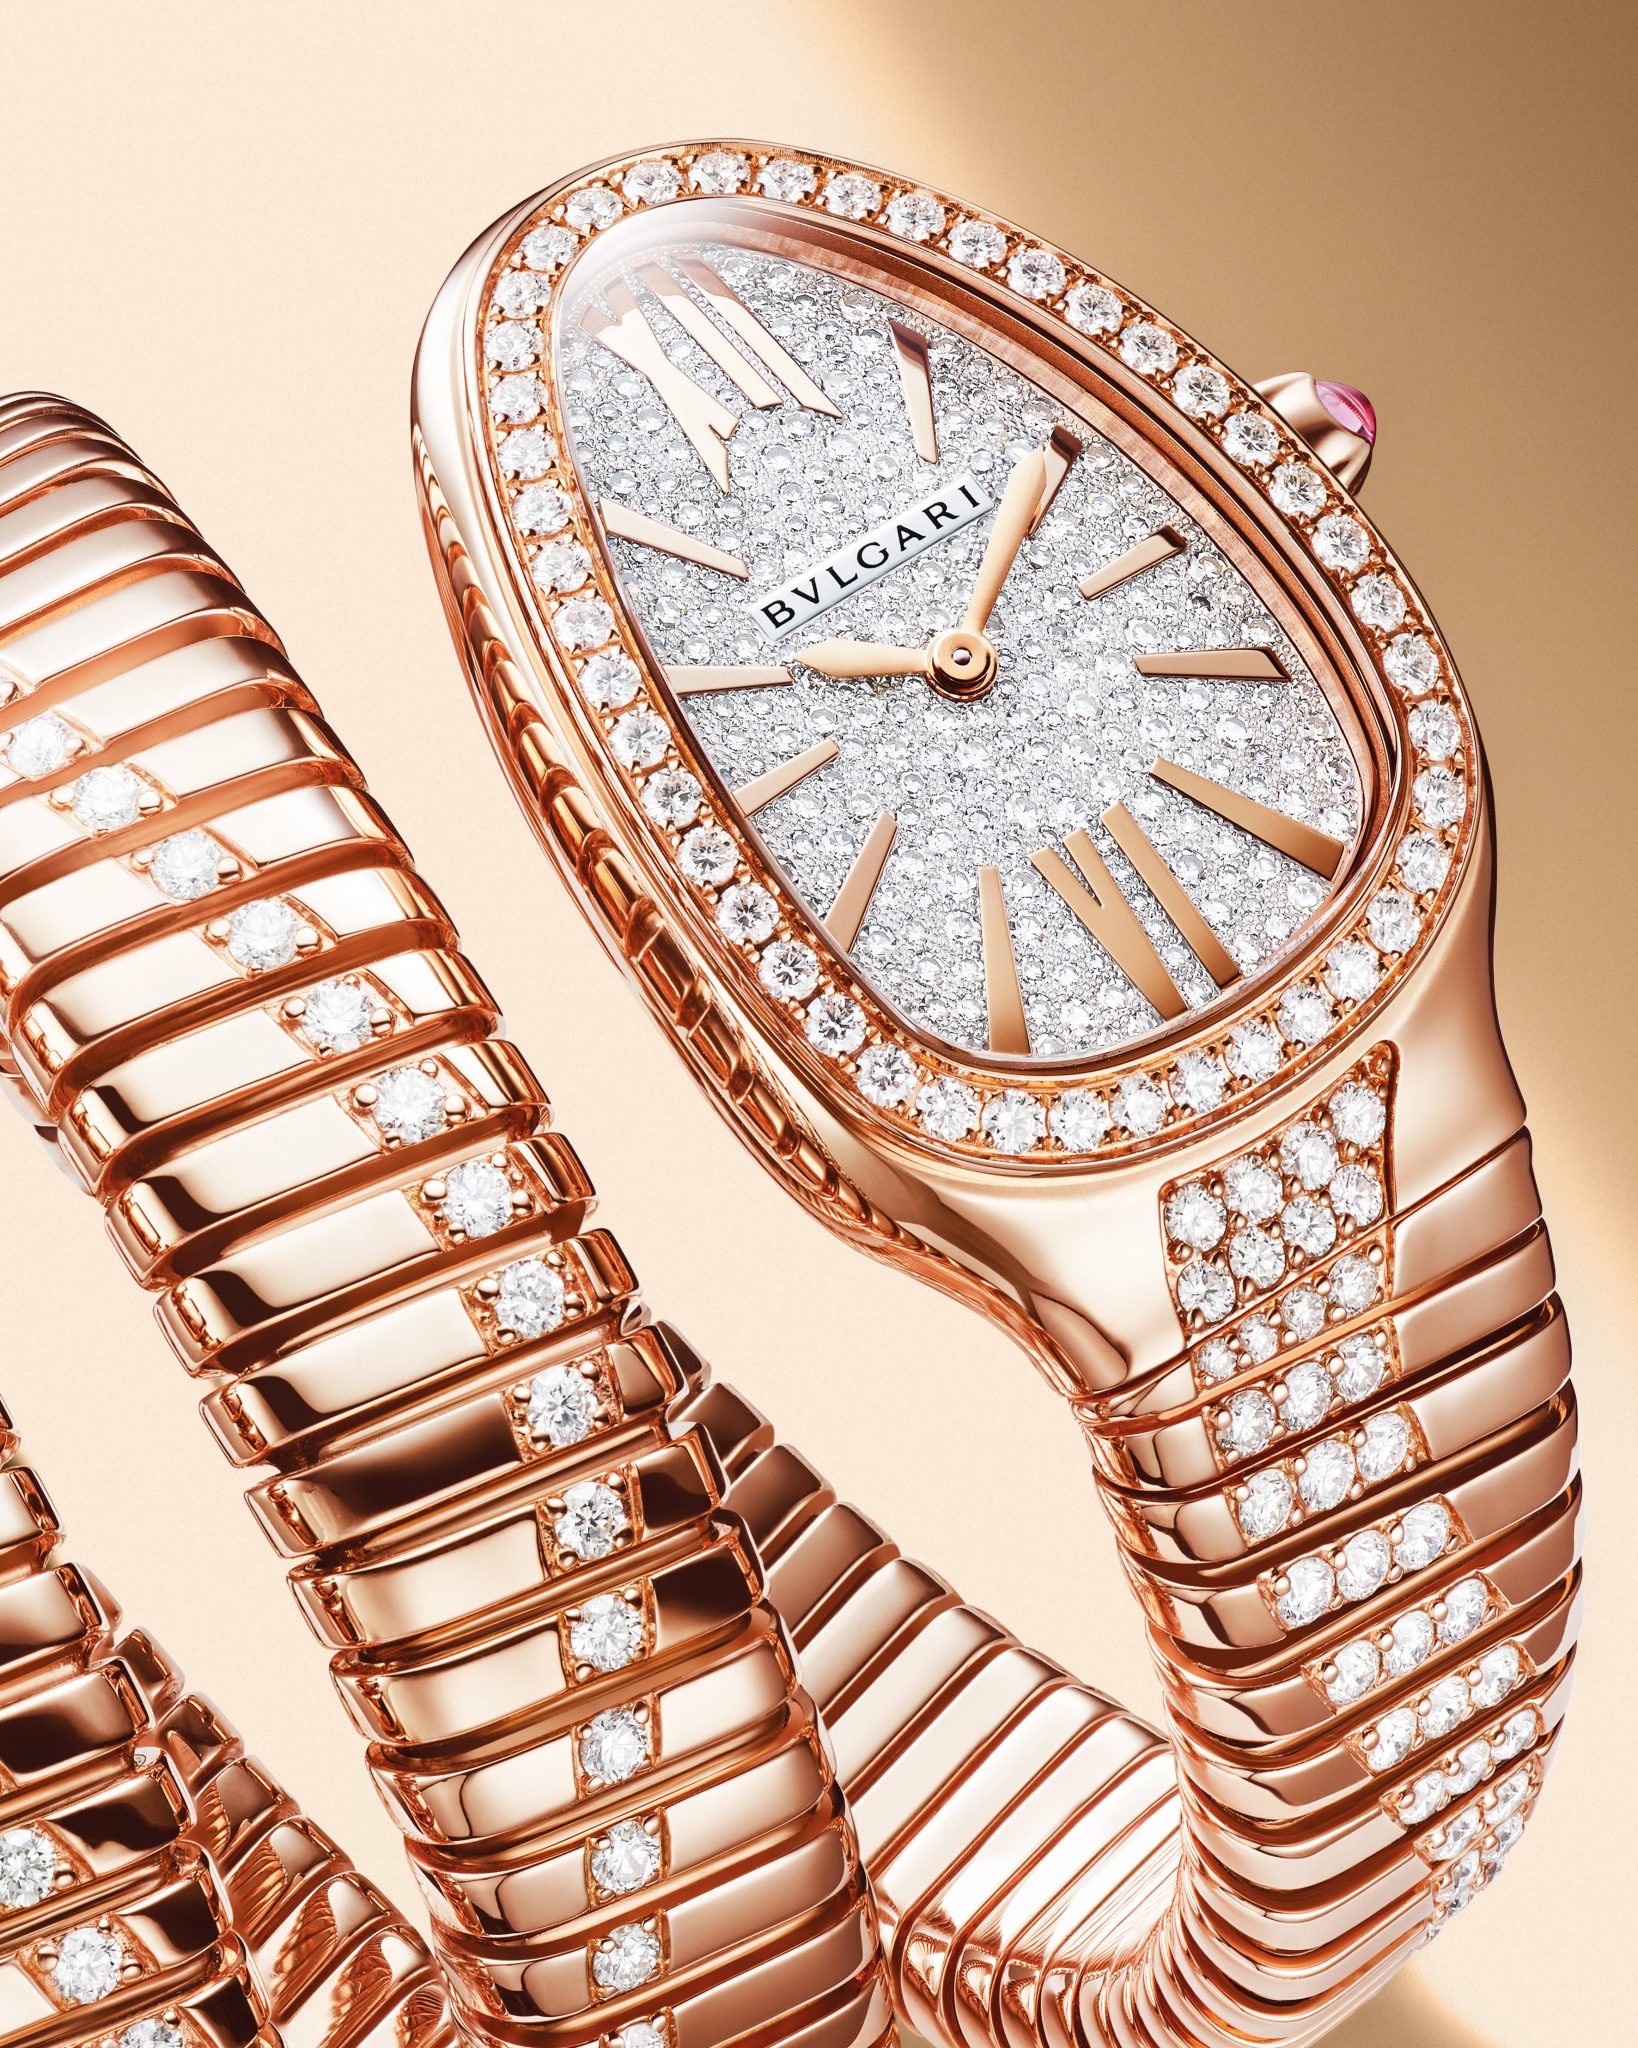 LVMH - Iconic Bulgari jewelry collections and exceptional